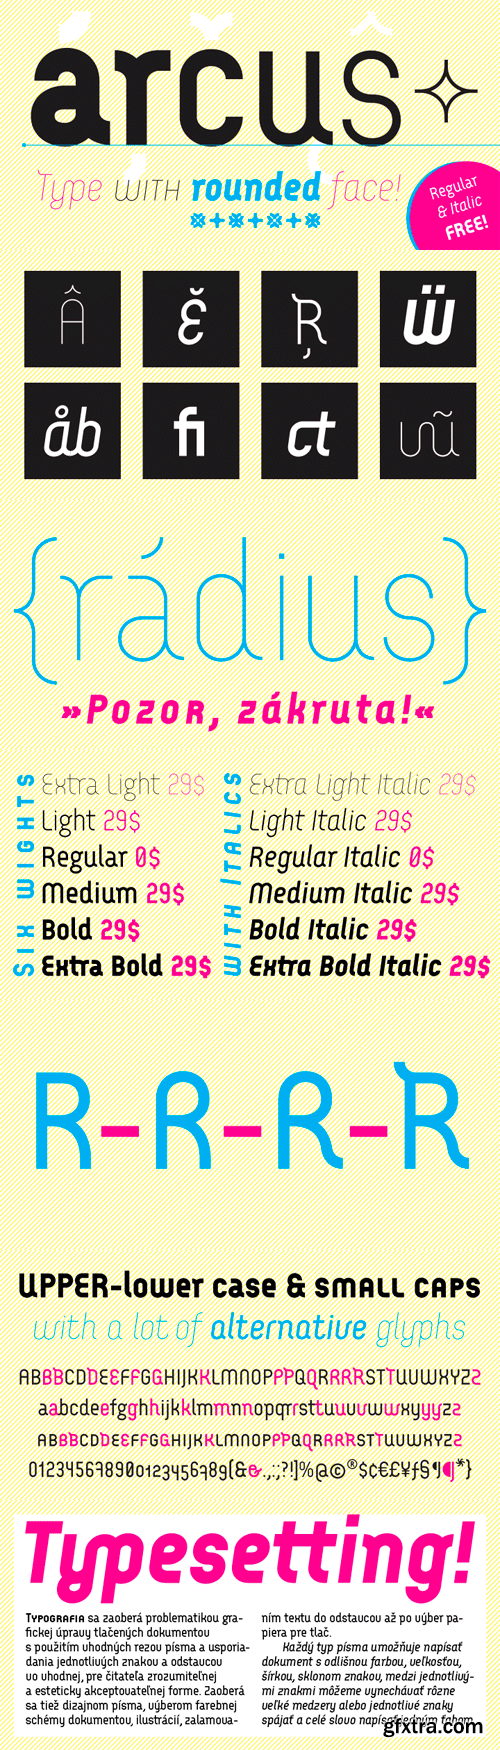 Arcus Font Family - 12 Fonts for $180